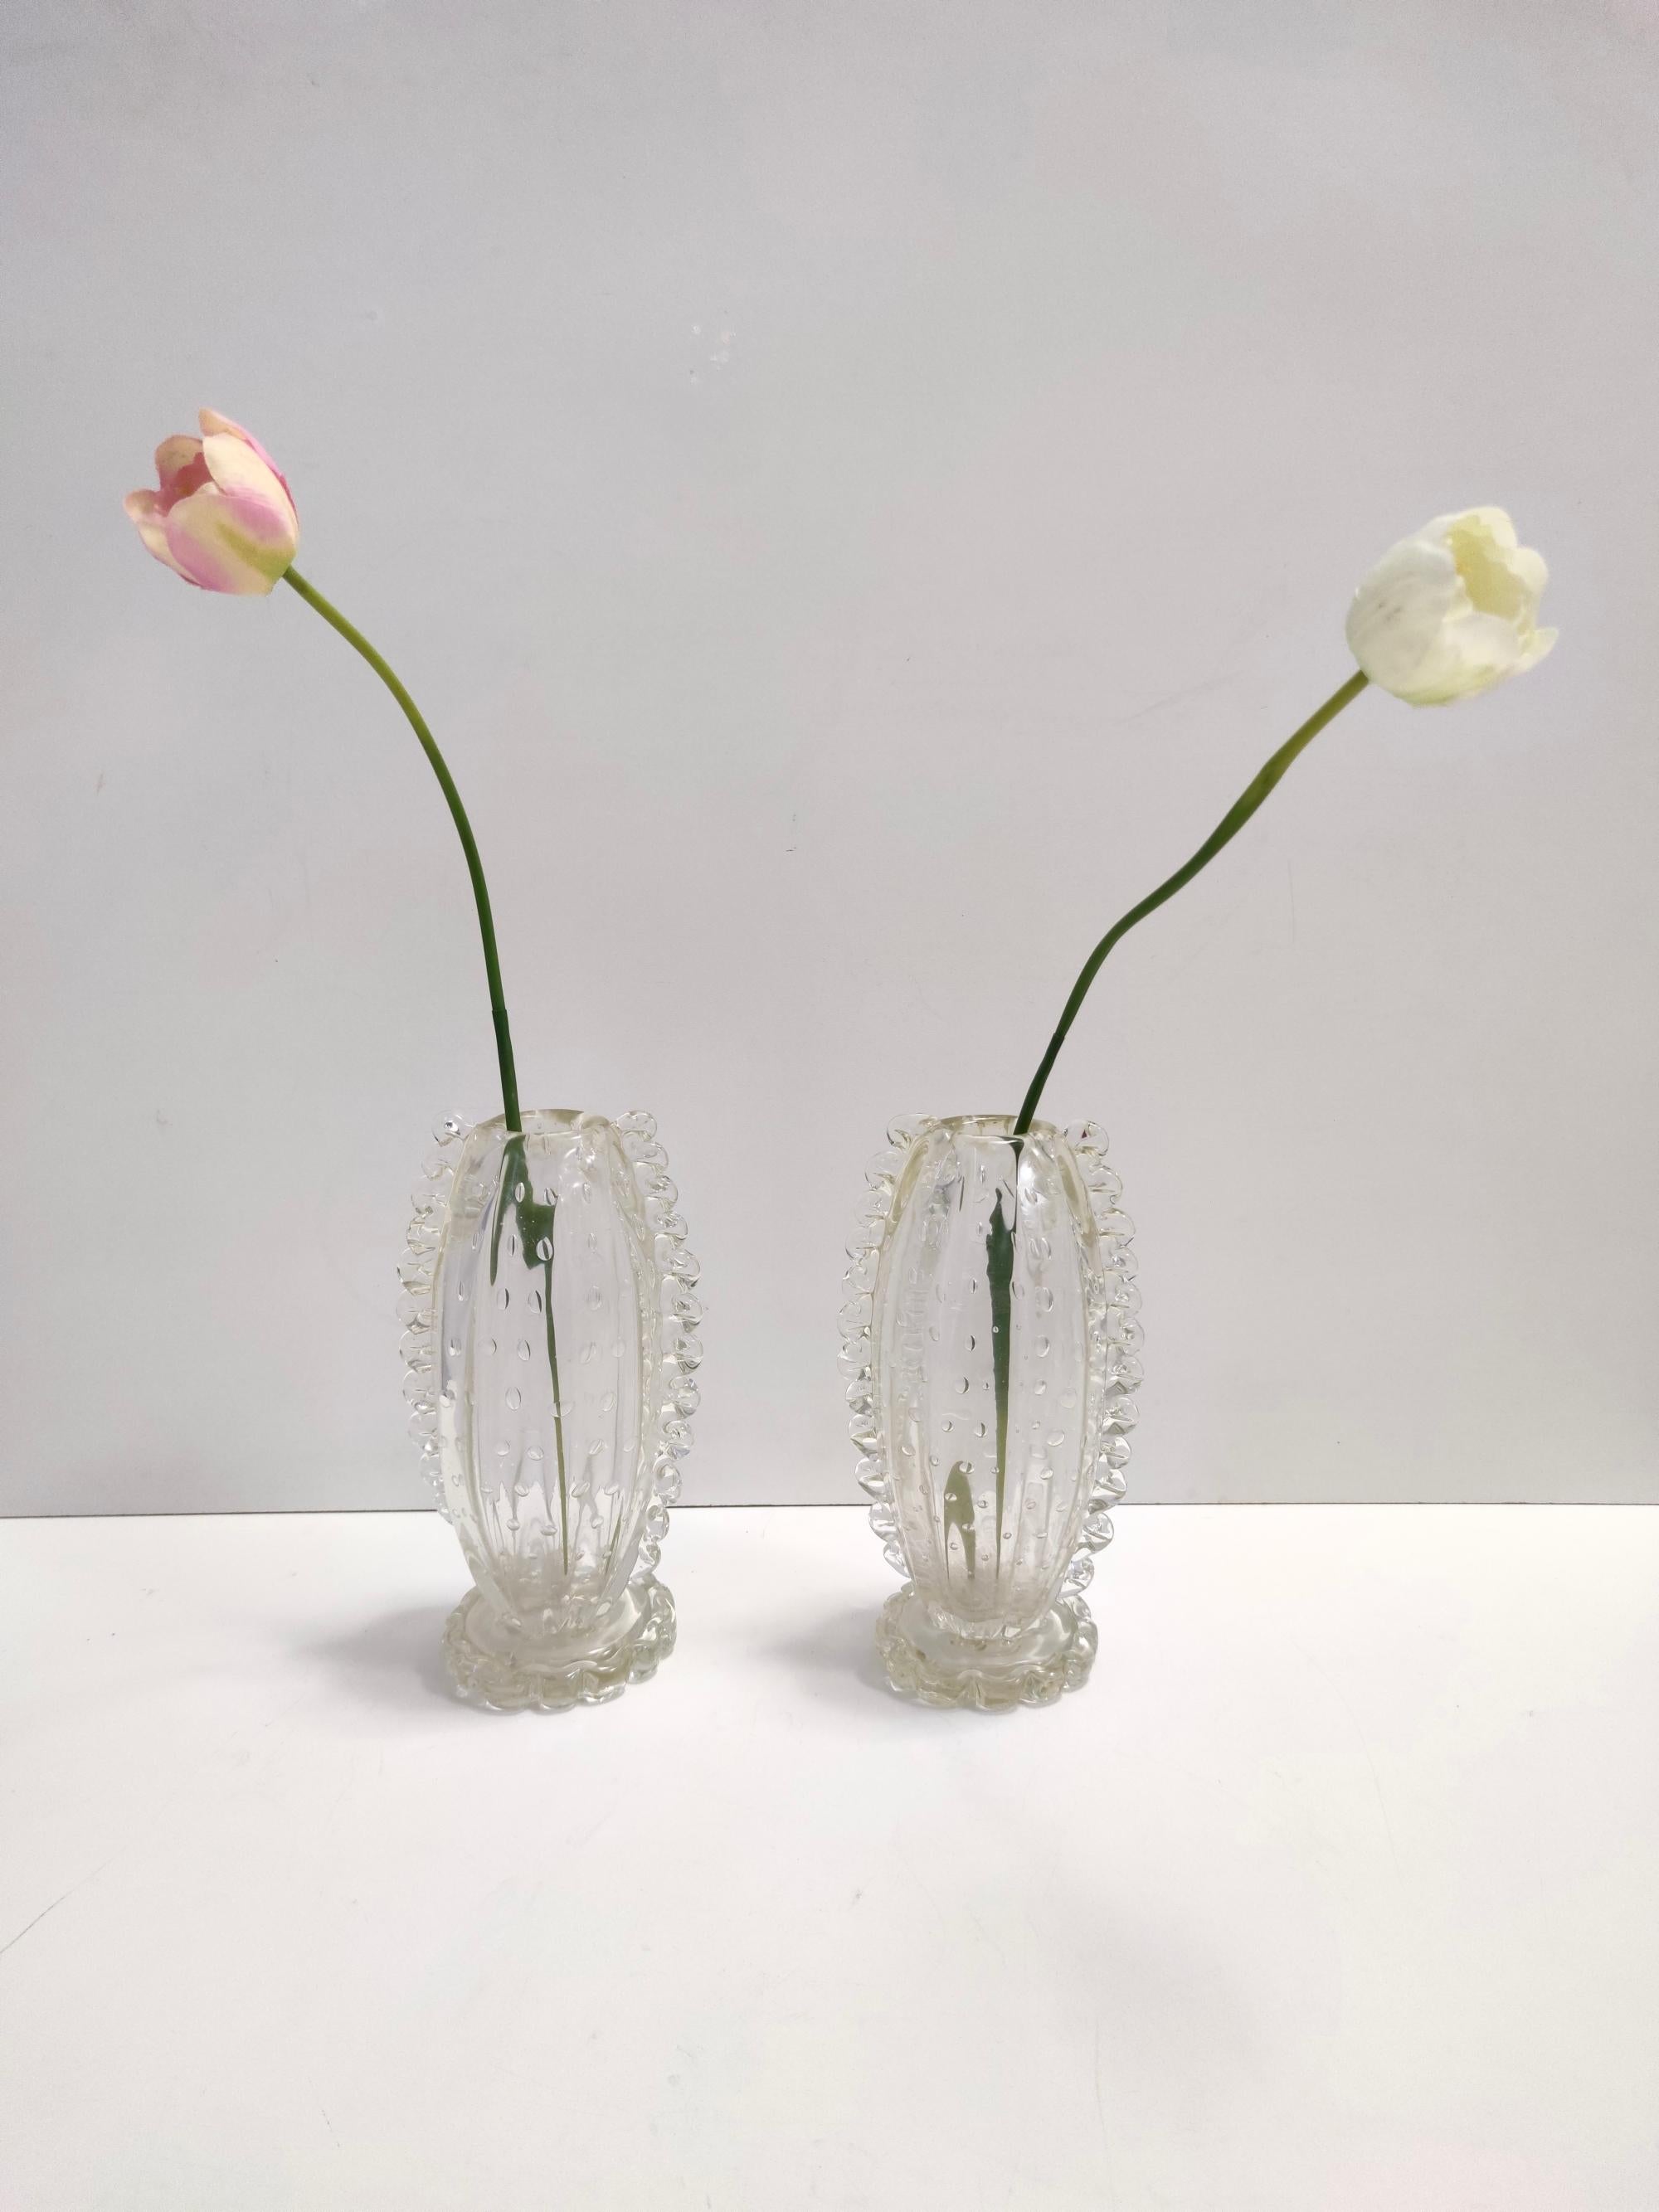 Made in Italy, 1930s - 1940s
Made in transparent bullicante hand-blown Murano glass by Ercole Barovier. 
These vases are original and quite rare to find as a pair, especially in this condition. 
They are vintage pieces, therefore they might show